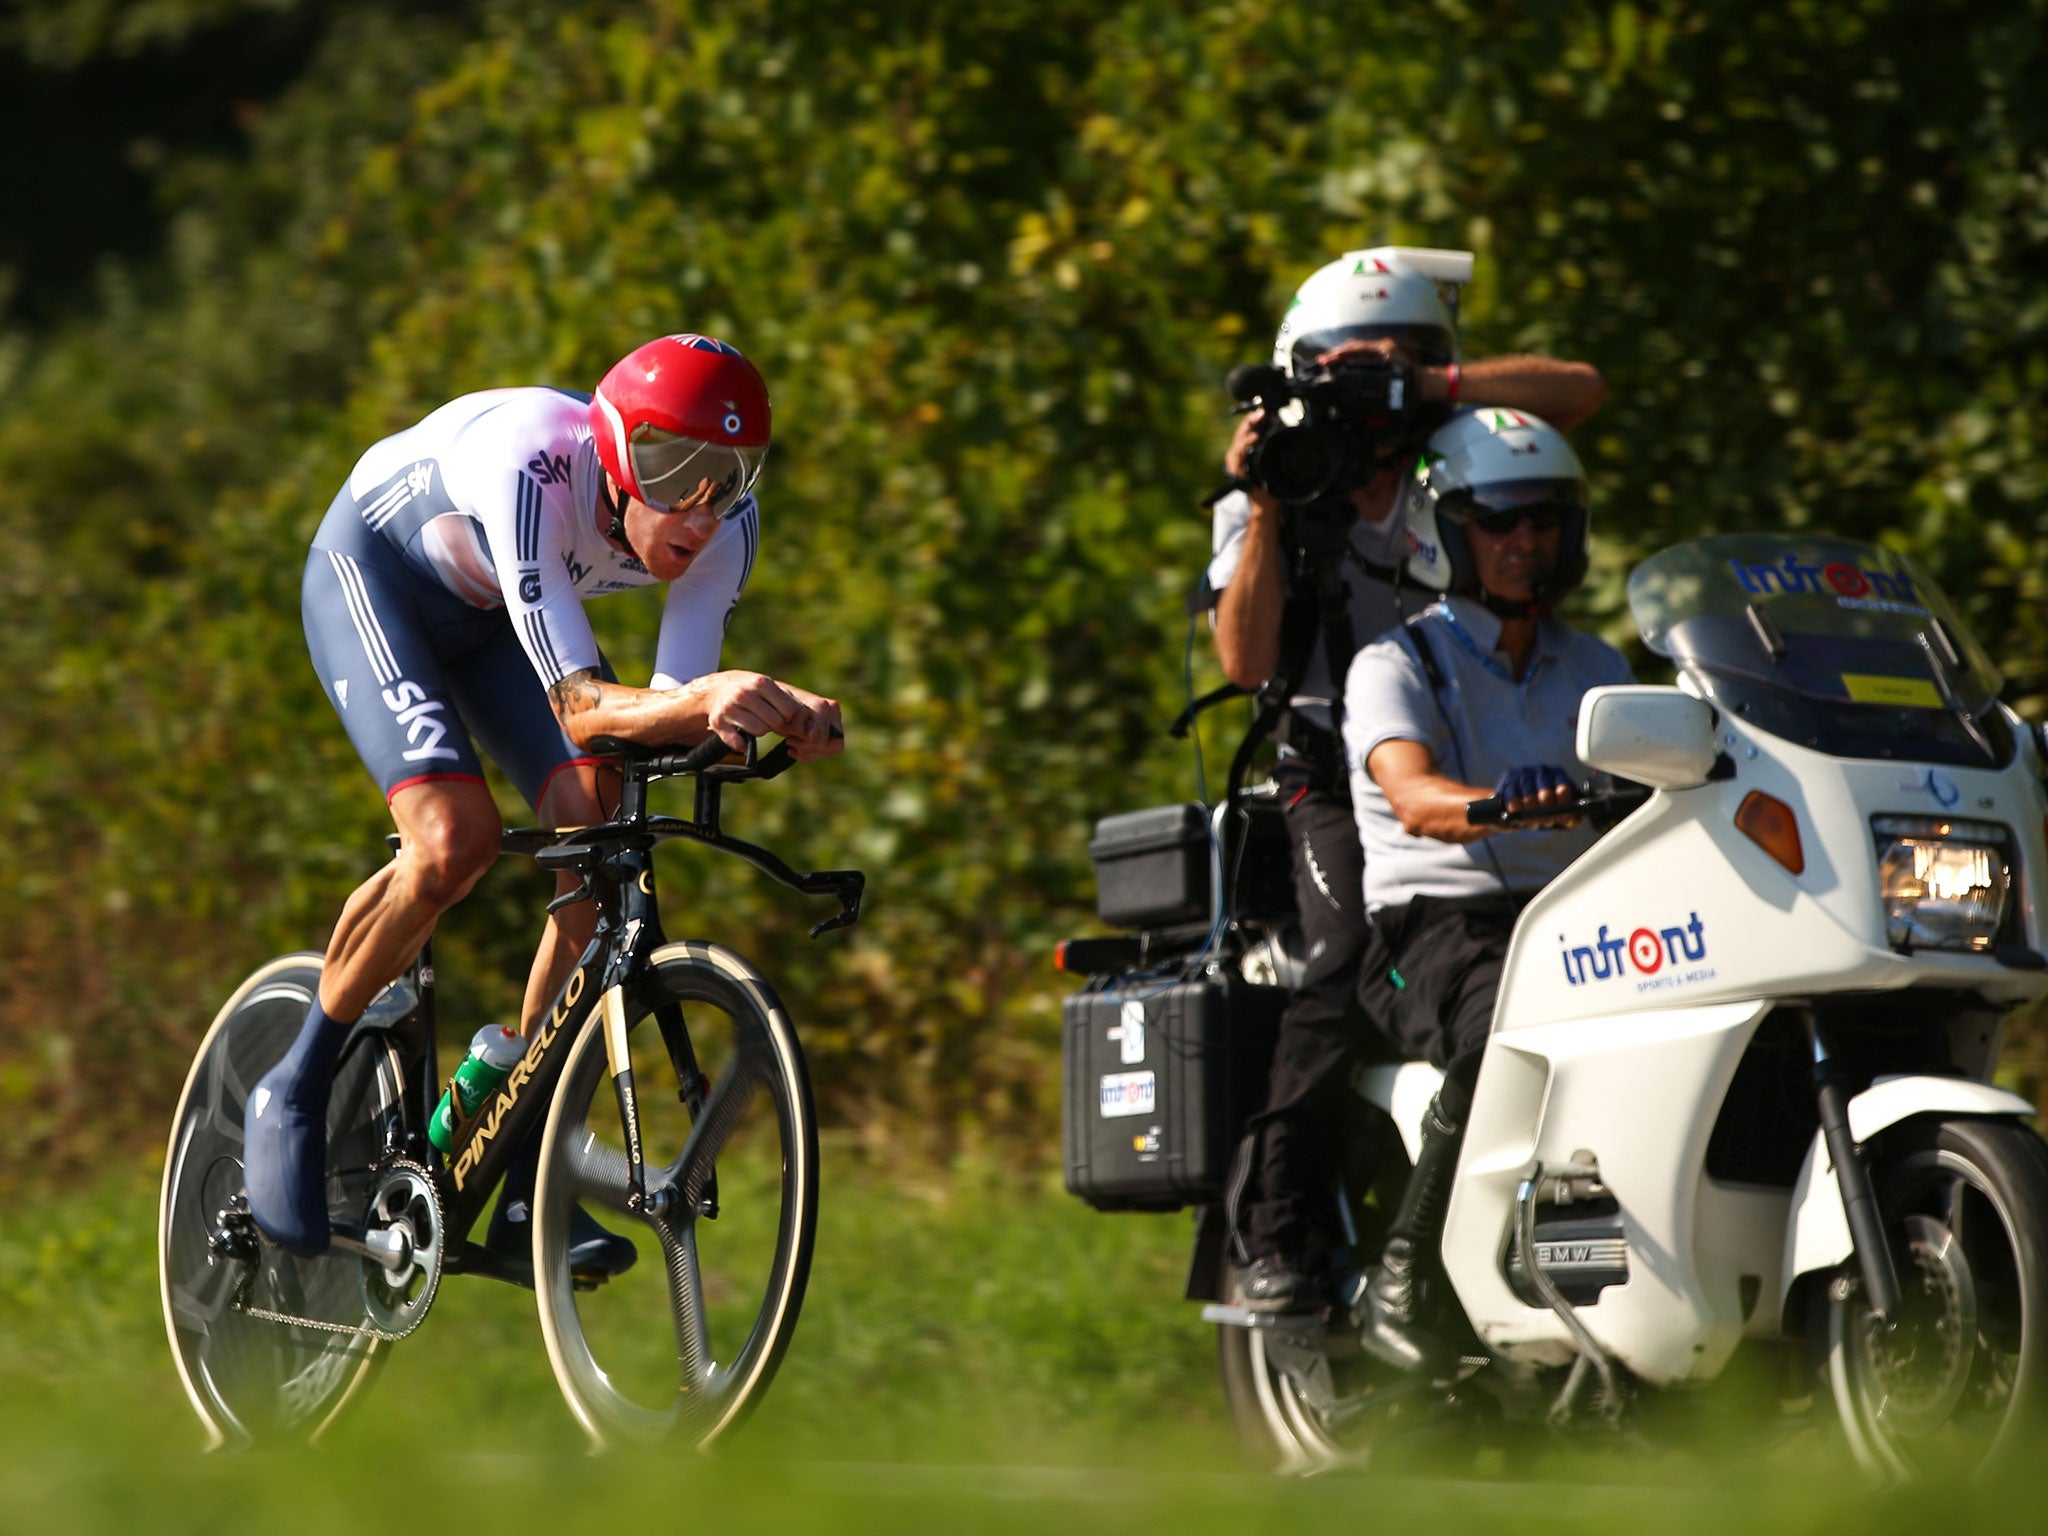 Sir Bradley Wiggins in action during the time trial